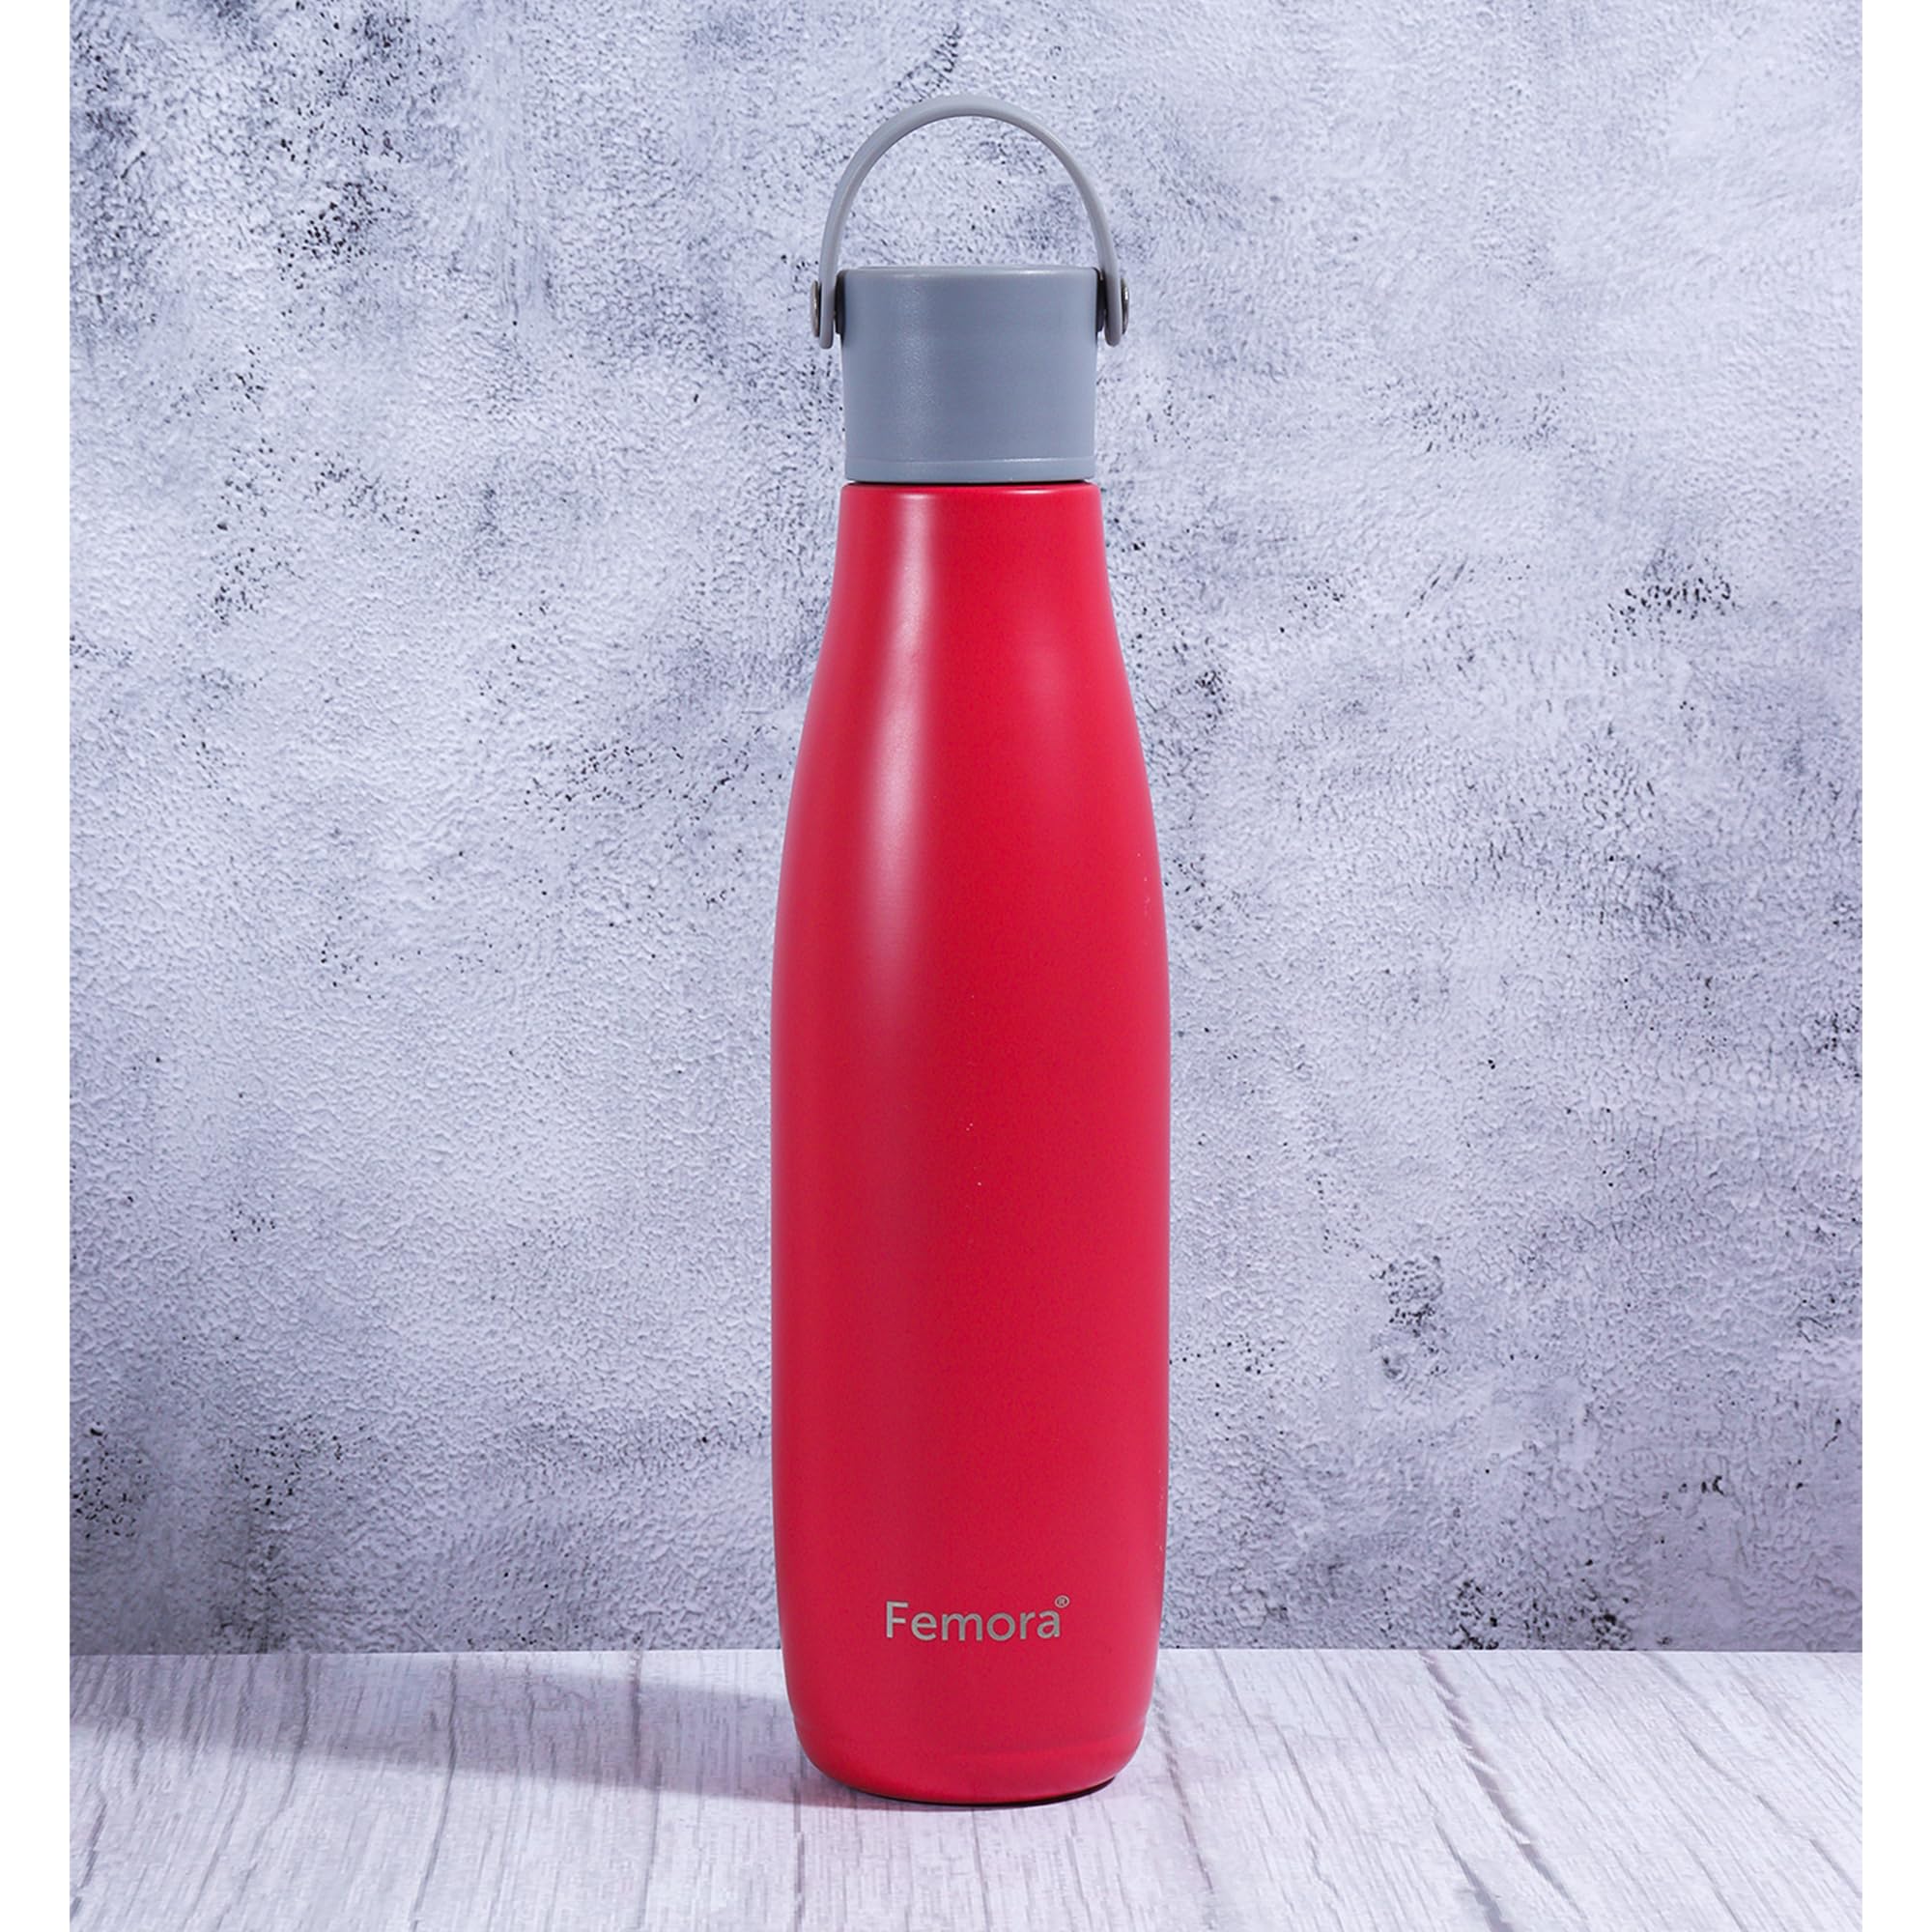 Femora Stainless Steel PureQuench Lifestyle Vessel Vacuum Insulated Flask Water Bottle, 700 ML, Red